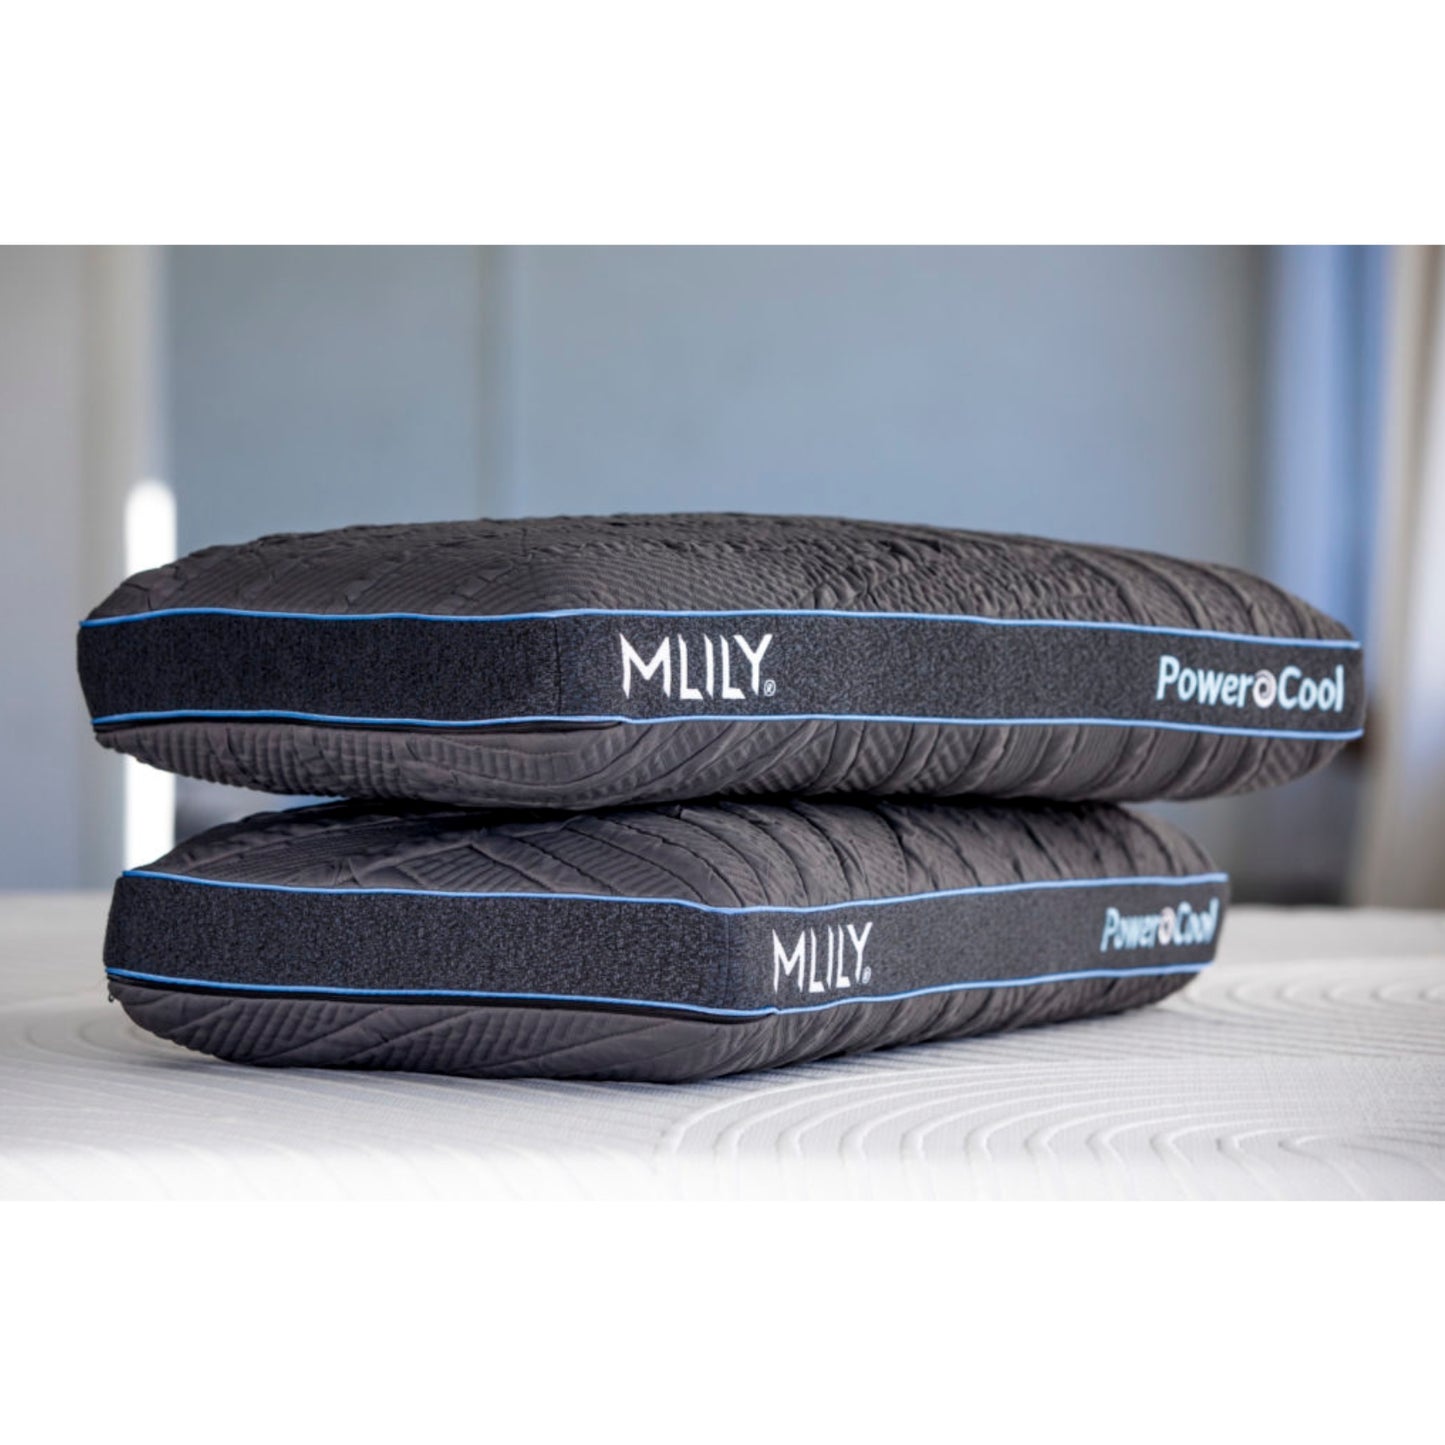 PowerCool 11.5" Hybrid Mattress With Ventilated Memory Foam Pillow(s) And Adjustable Base Featuring Integrated Cooling Fans, Stacked Corner View, Pillows Only